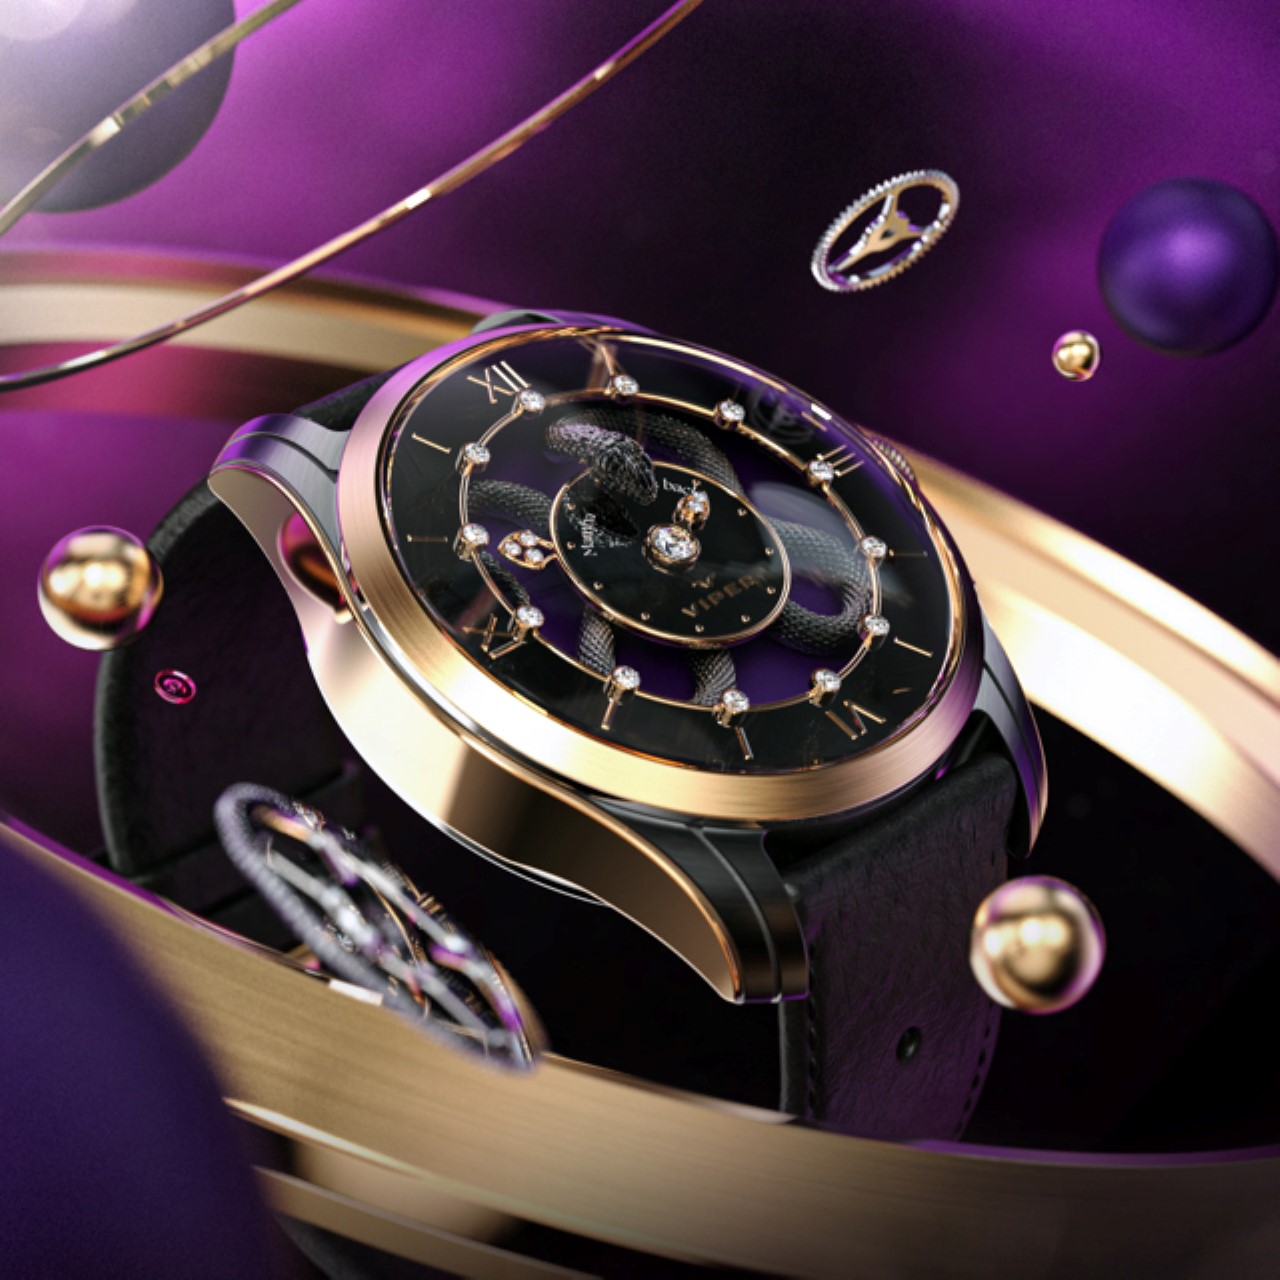 ‘Kobe Bryant Tribute Edition’ of the Viper Watch pays homage to the ...